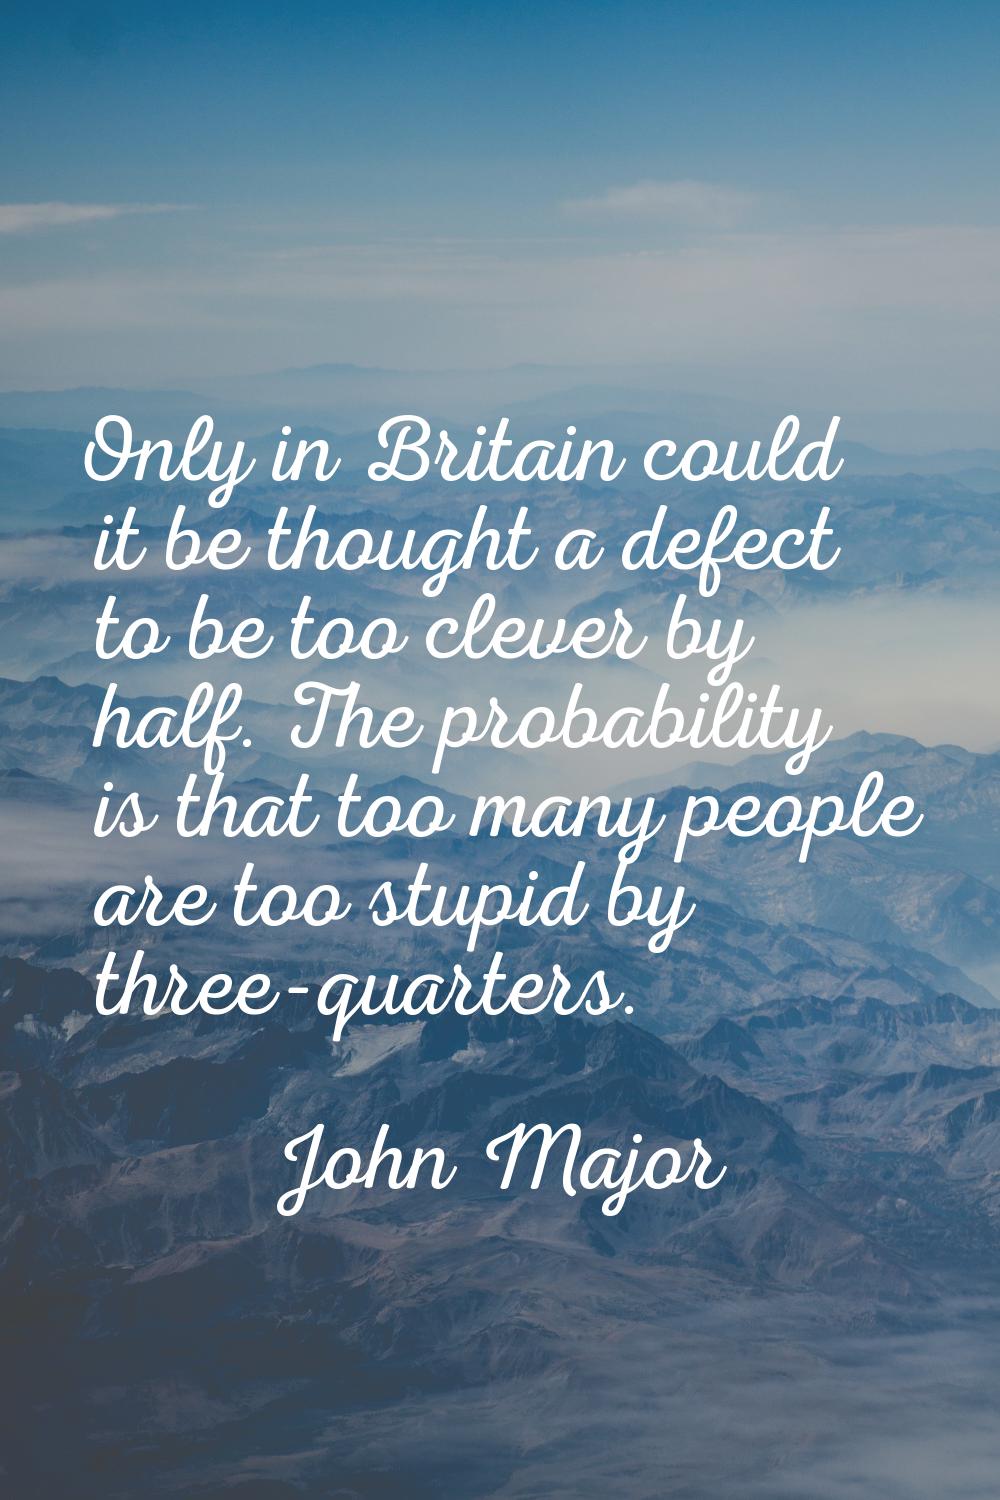 Only in Britain could it be thought a defect to be too clever by half. The probability is that too 